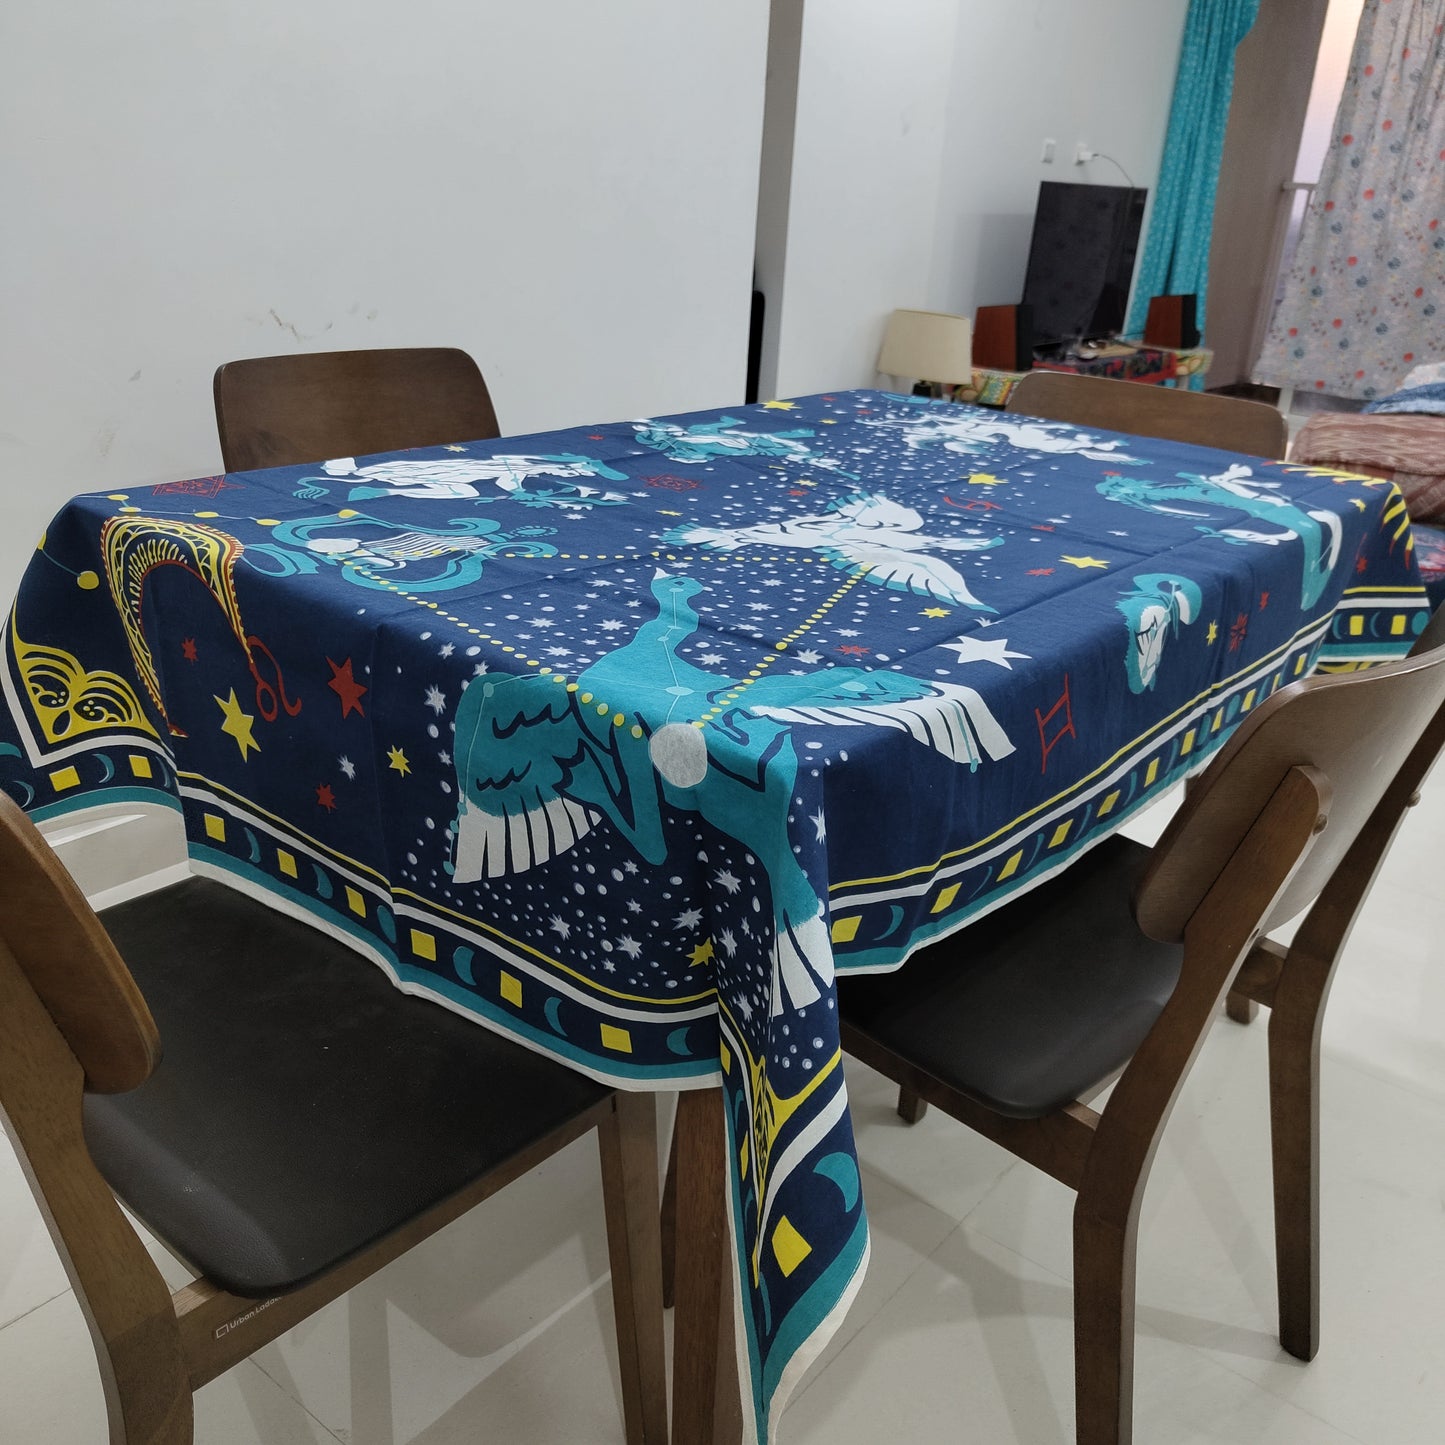 Hermes Greek  4 Seater  Table Cover 45 x 60 inches -Blue